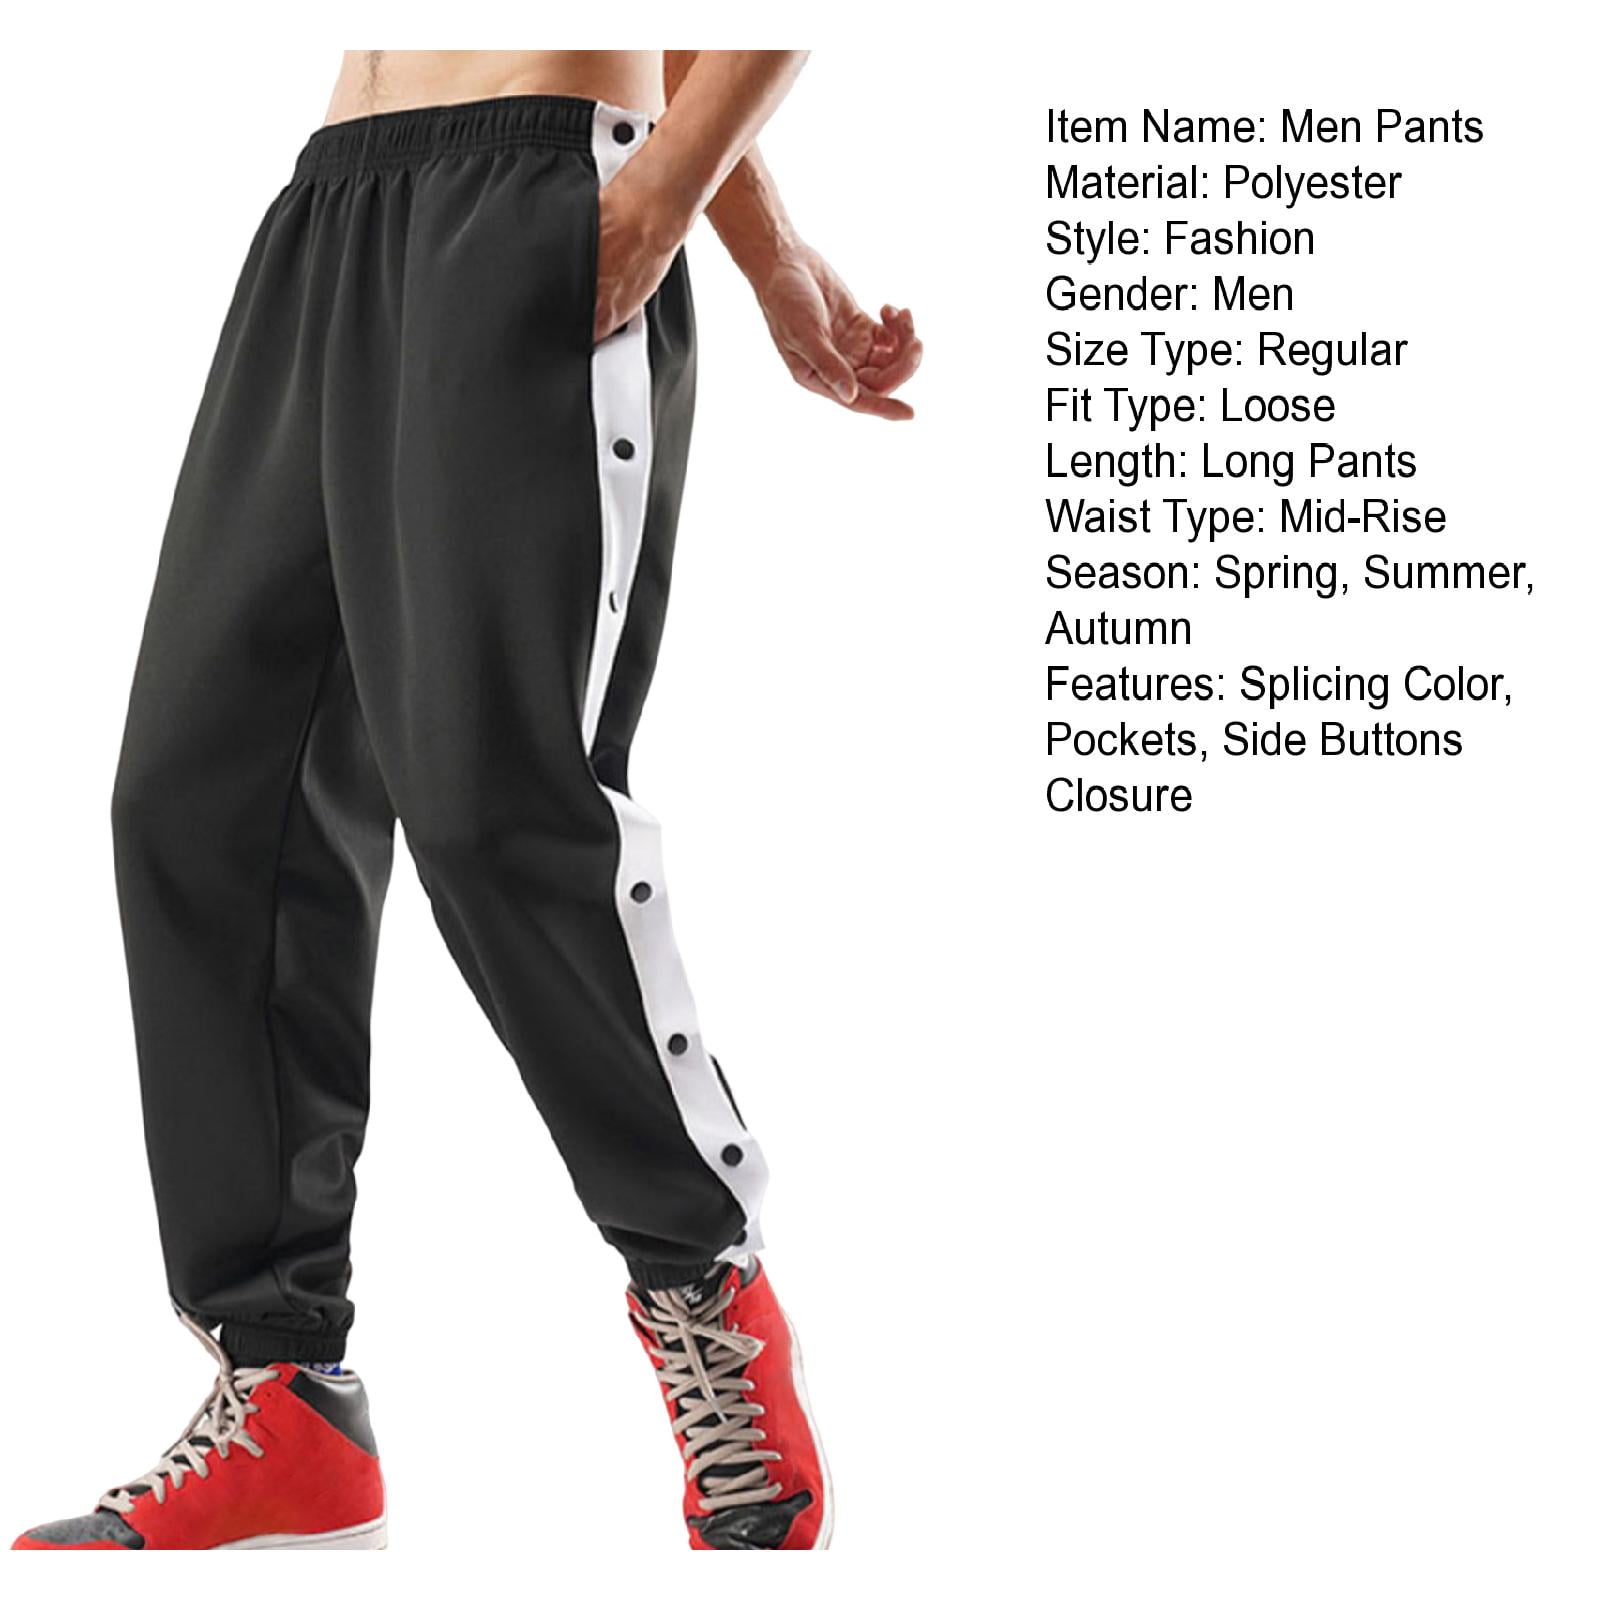  Women's Tear Away Basketball Pants High Split Snap Button  Sweatpants Warm Up Active Trousers Casual Post-Surgery Pant with Pocket  Black : Clothing, Shoes & Jewelry